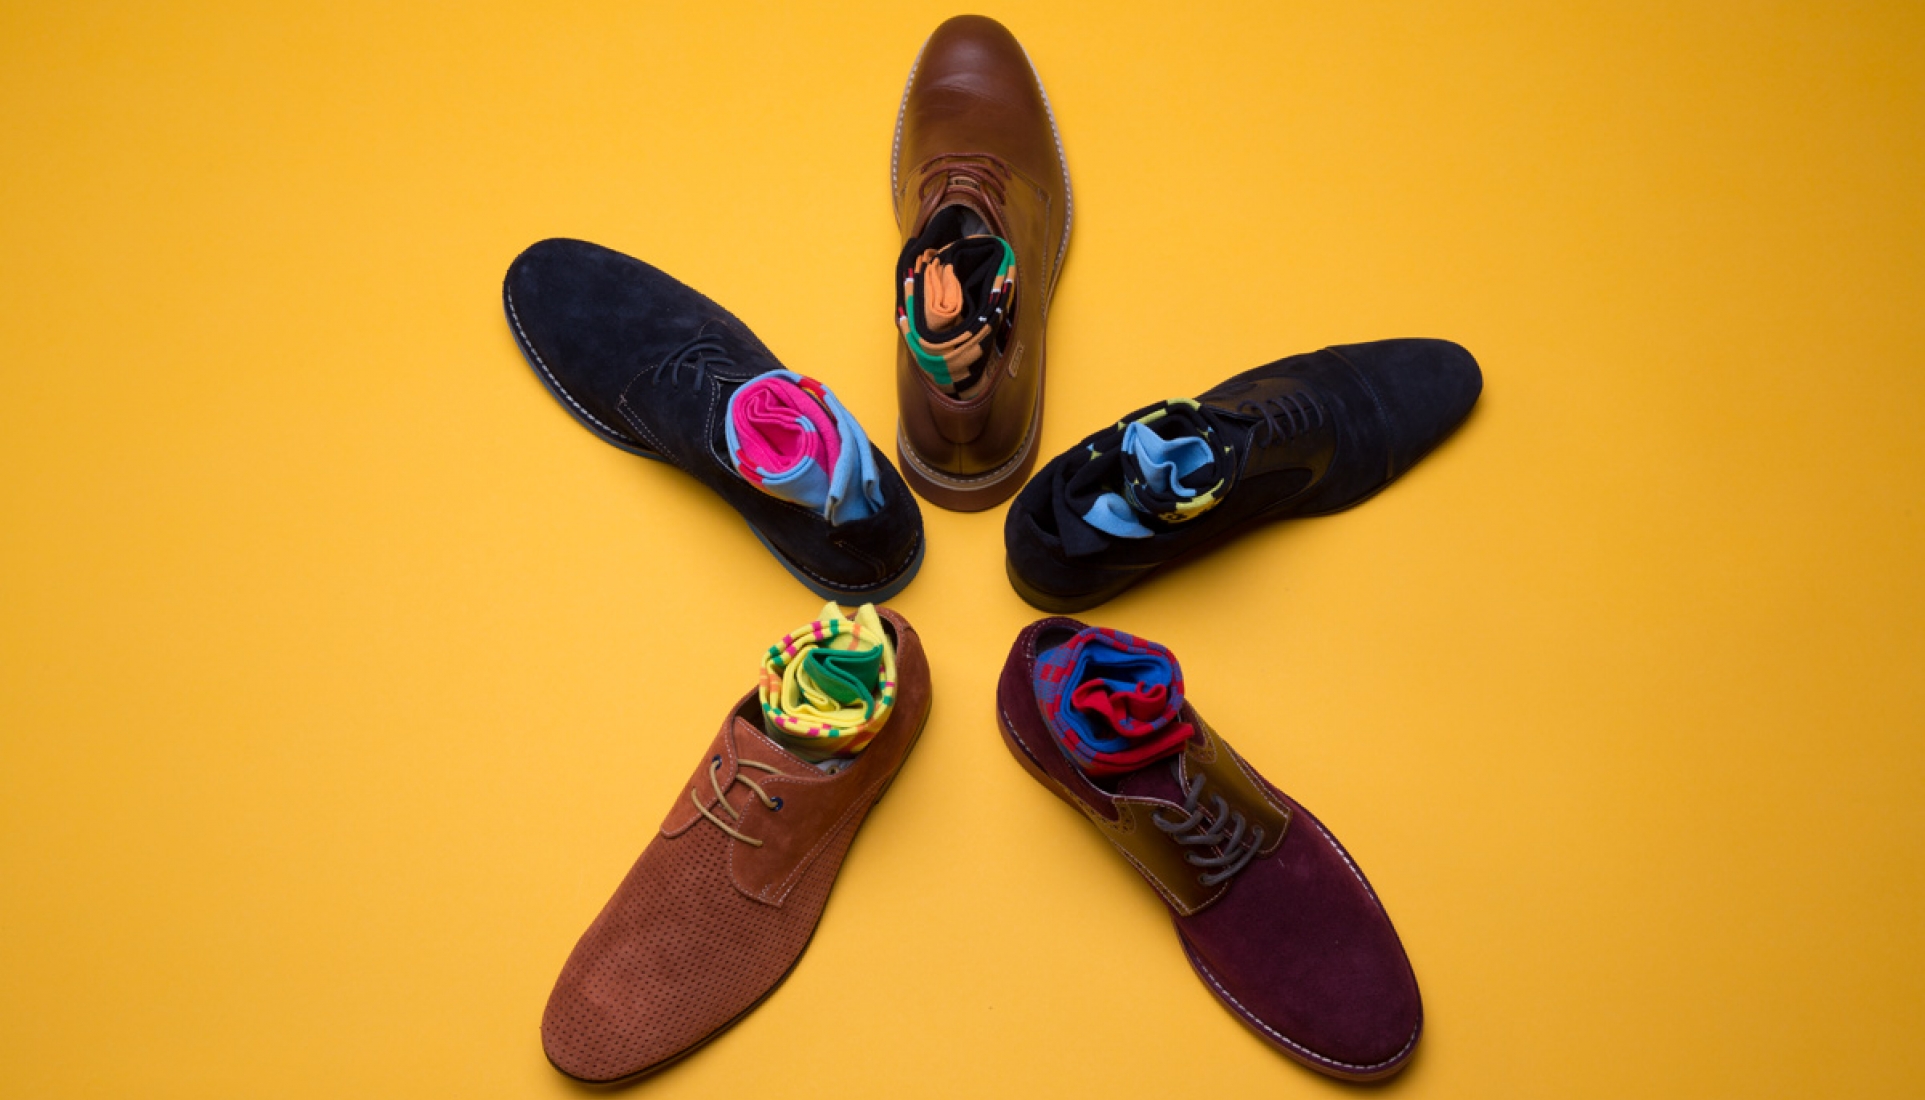 Coptic Soles - Mens Colorful Socks with a storyline